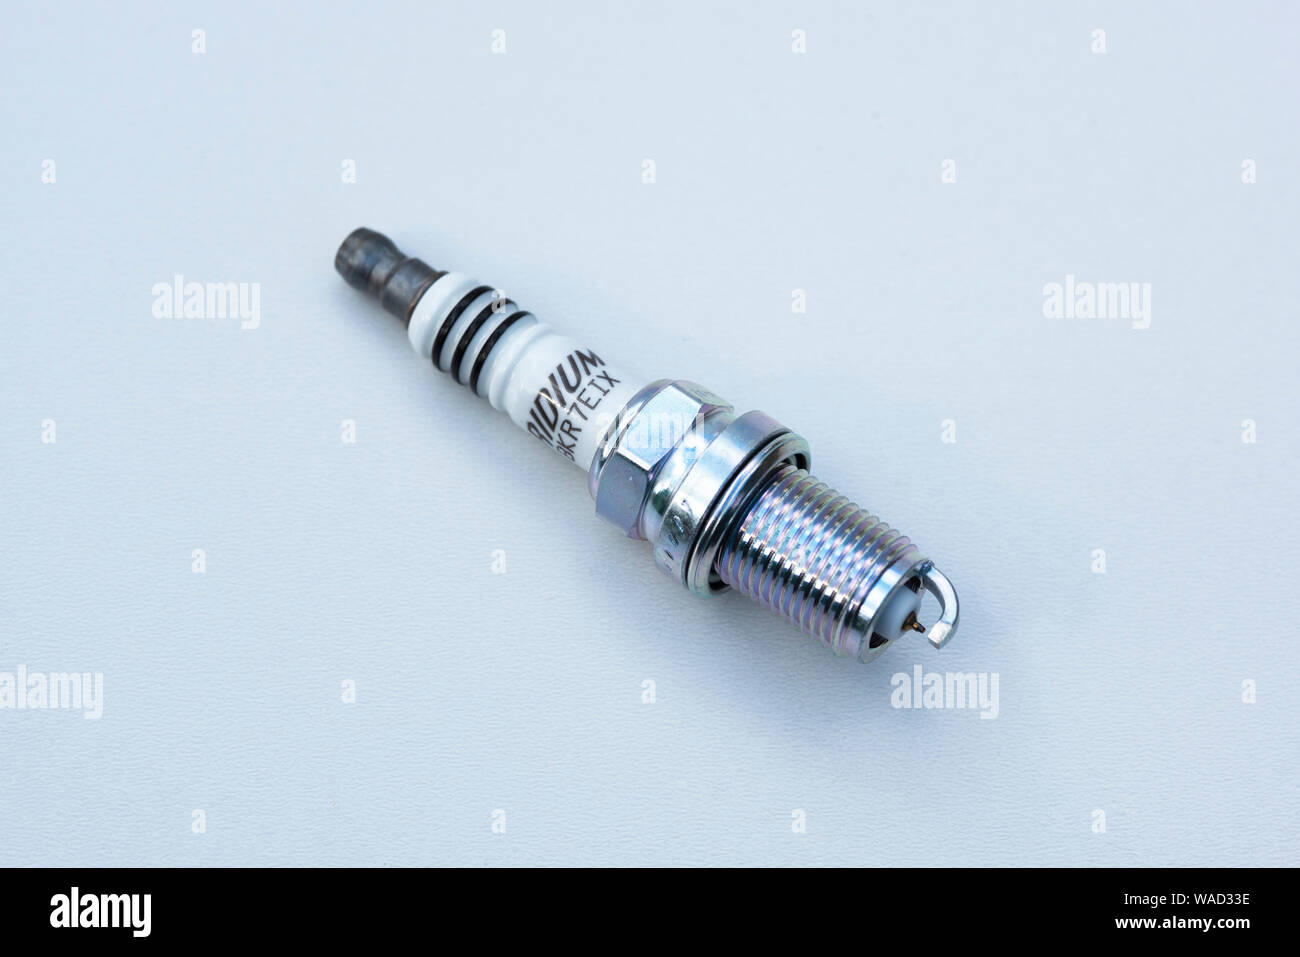 A single new spark plug for a modern petrol combustion engine Stock Photo